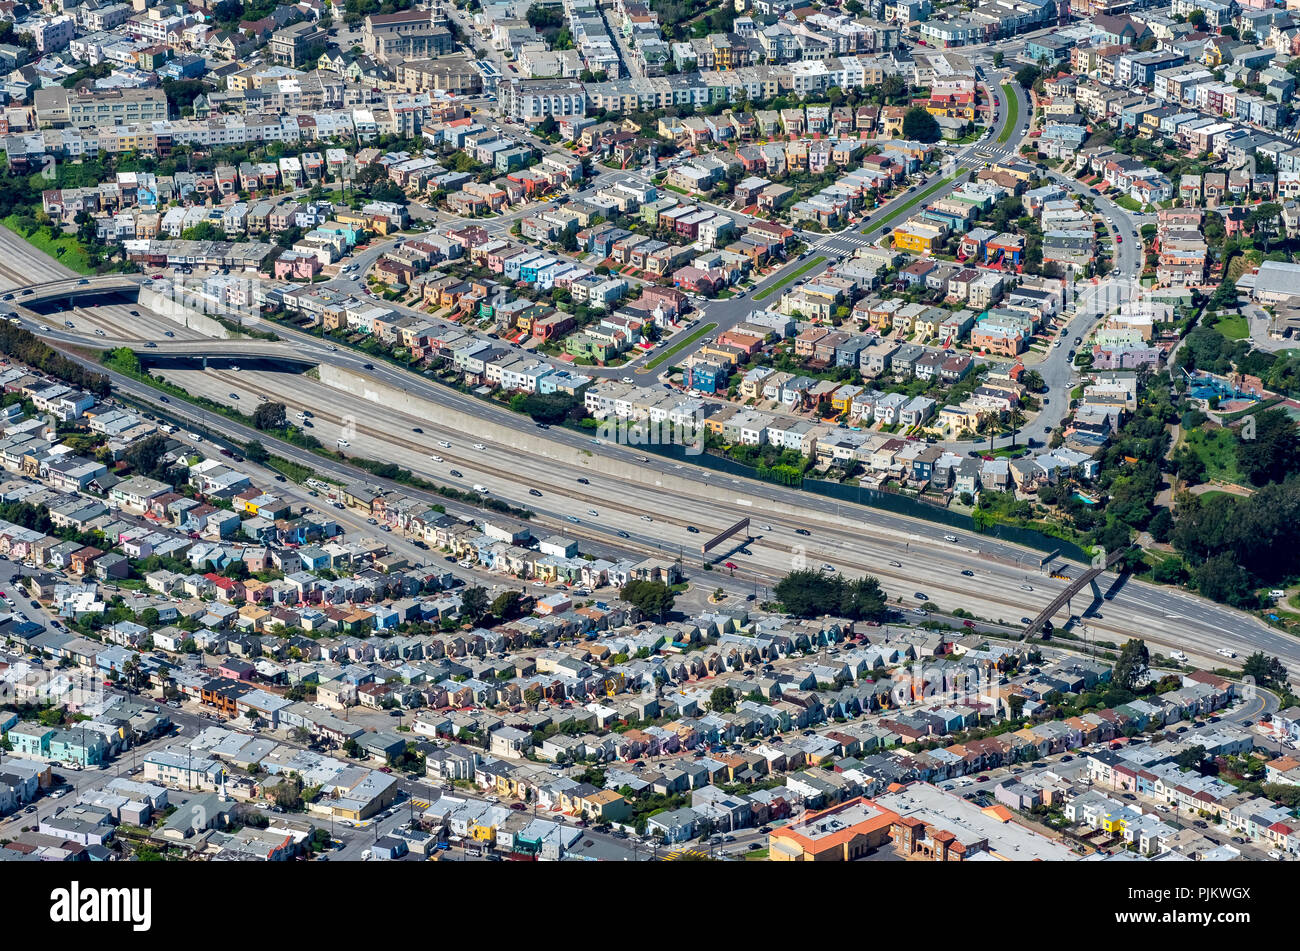 Typical American housing estate at the highway, Noise Pollution, noisy neighborhood, South San Francisco, San Francisco Bay Area, United States of America, California, USA Stock Photo